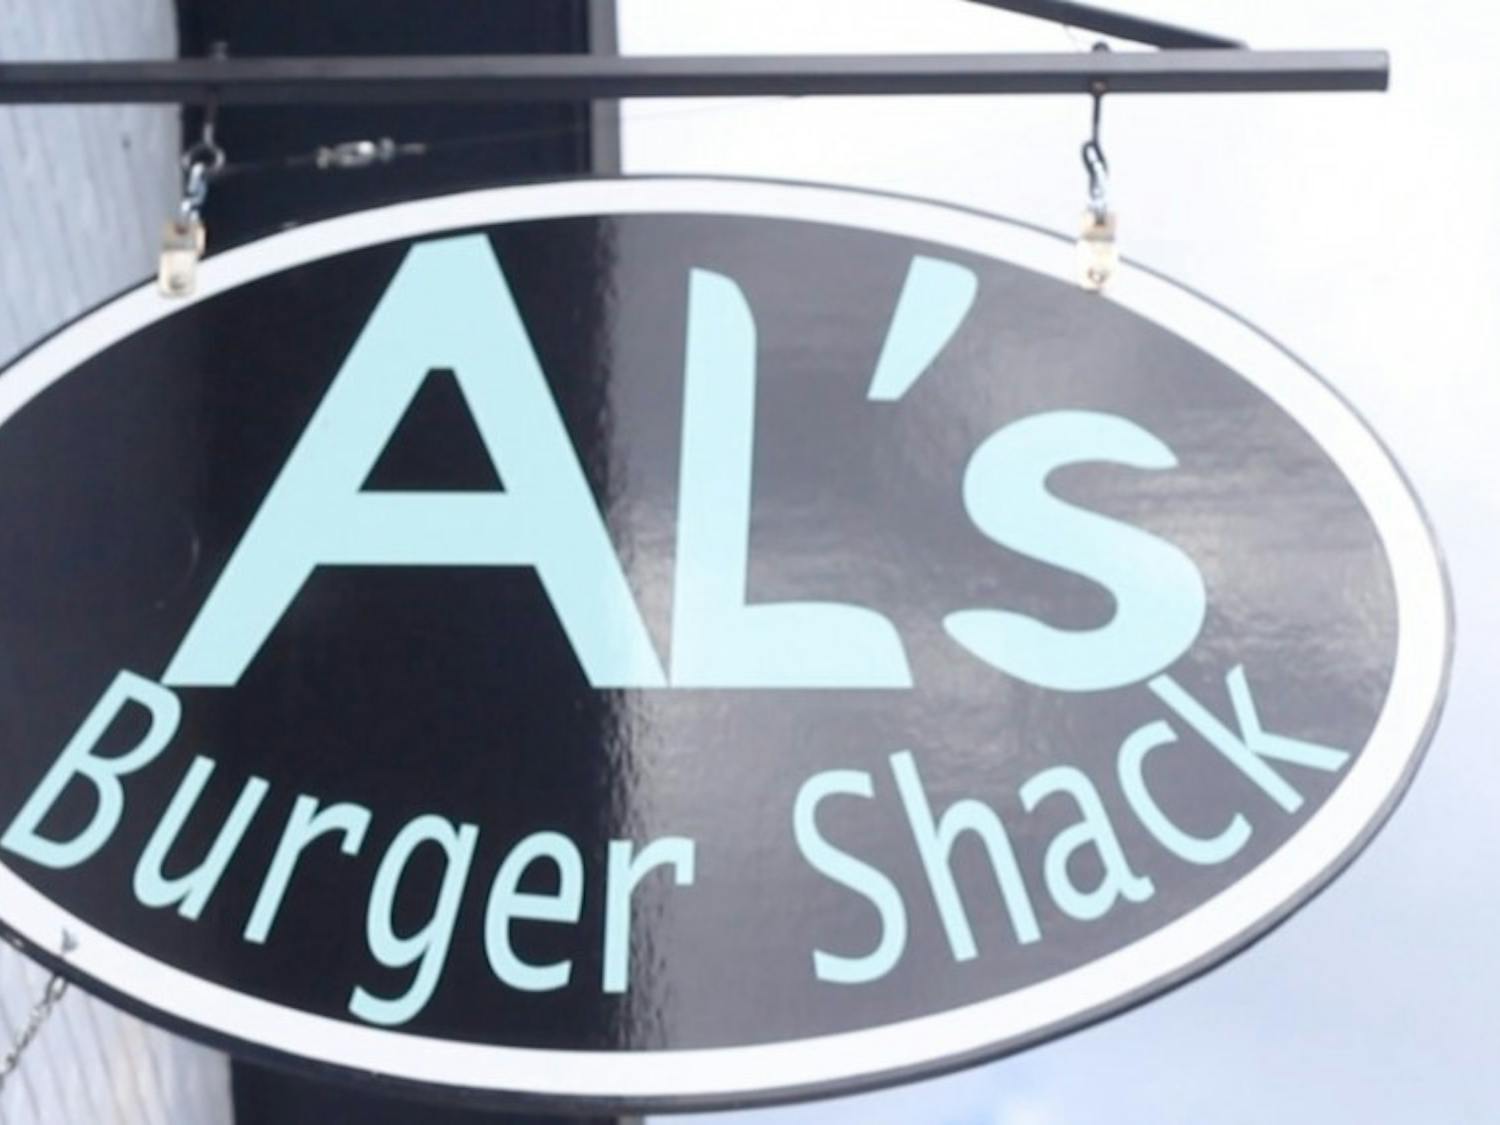 Al's Burger Shack is among the local businesses planning events to benefit Charlottesville organizations.